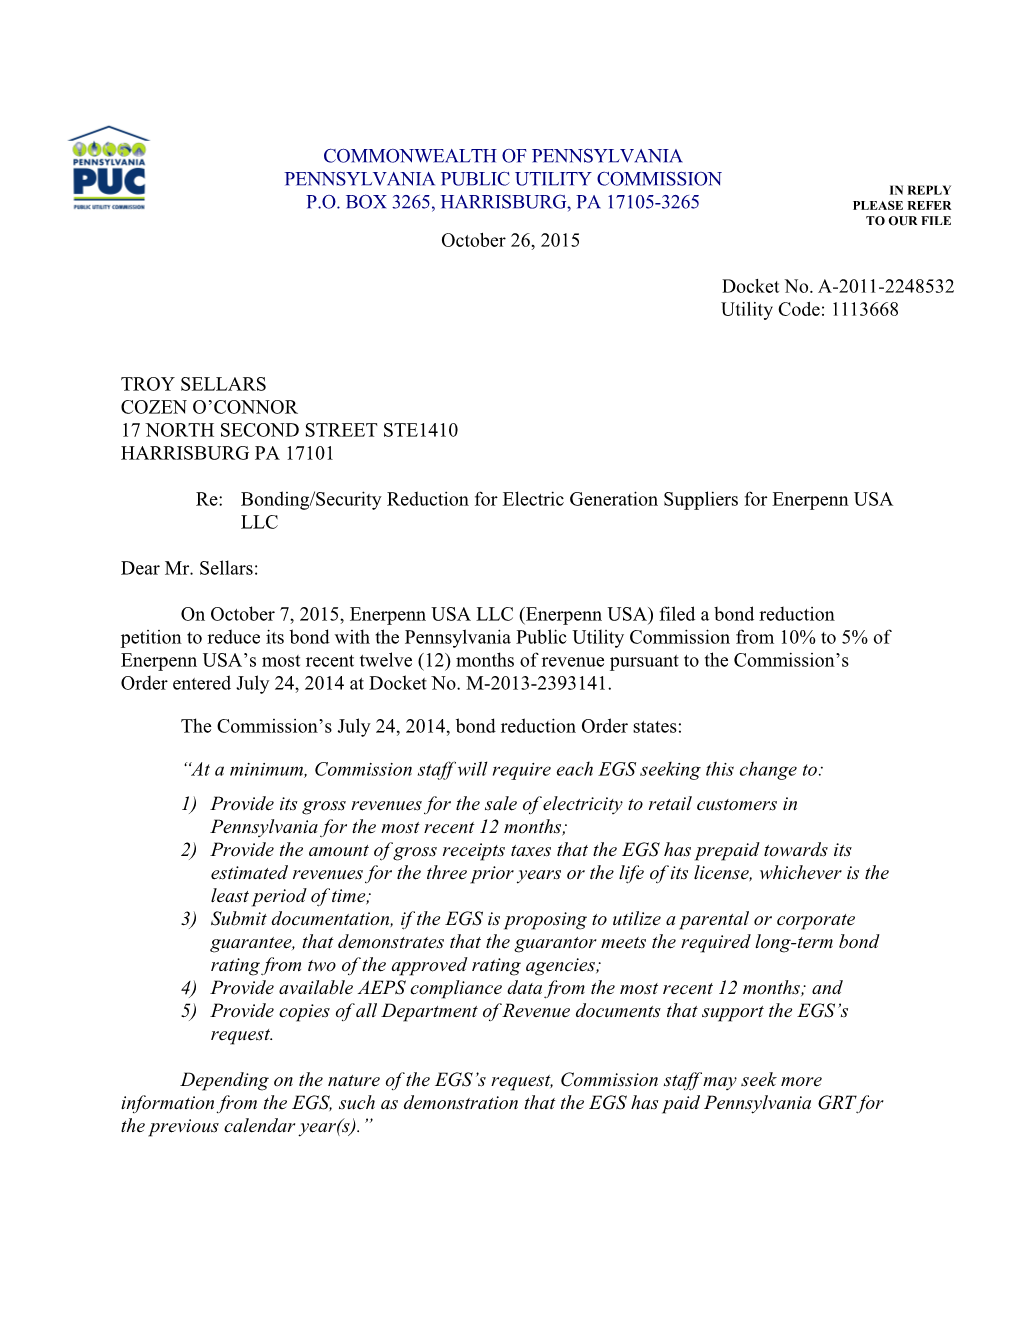 Re:Bonding/Security Reduction for Electric Generation Suppliers for Enerpenn USA LLC